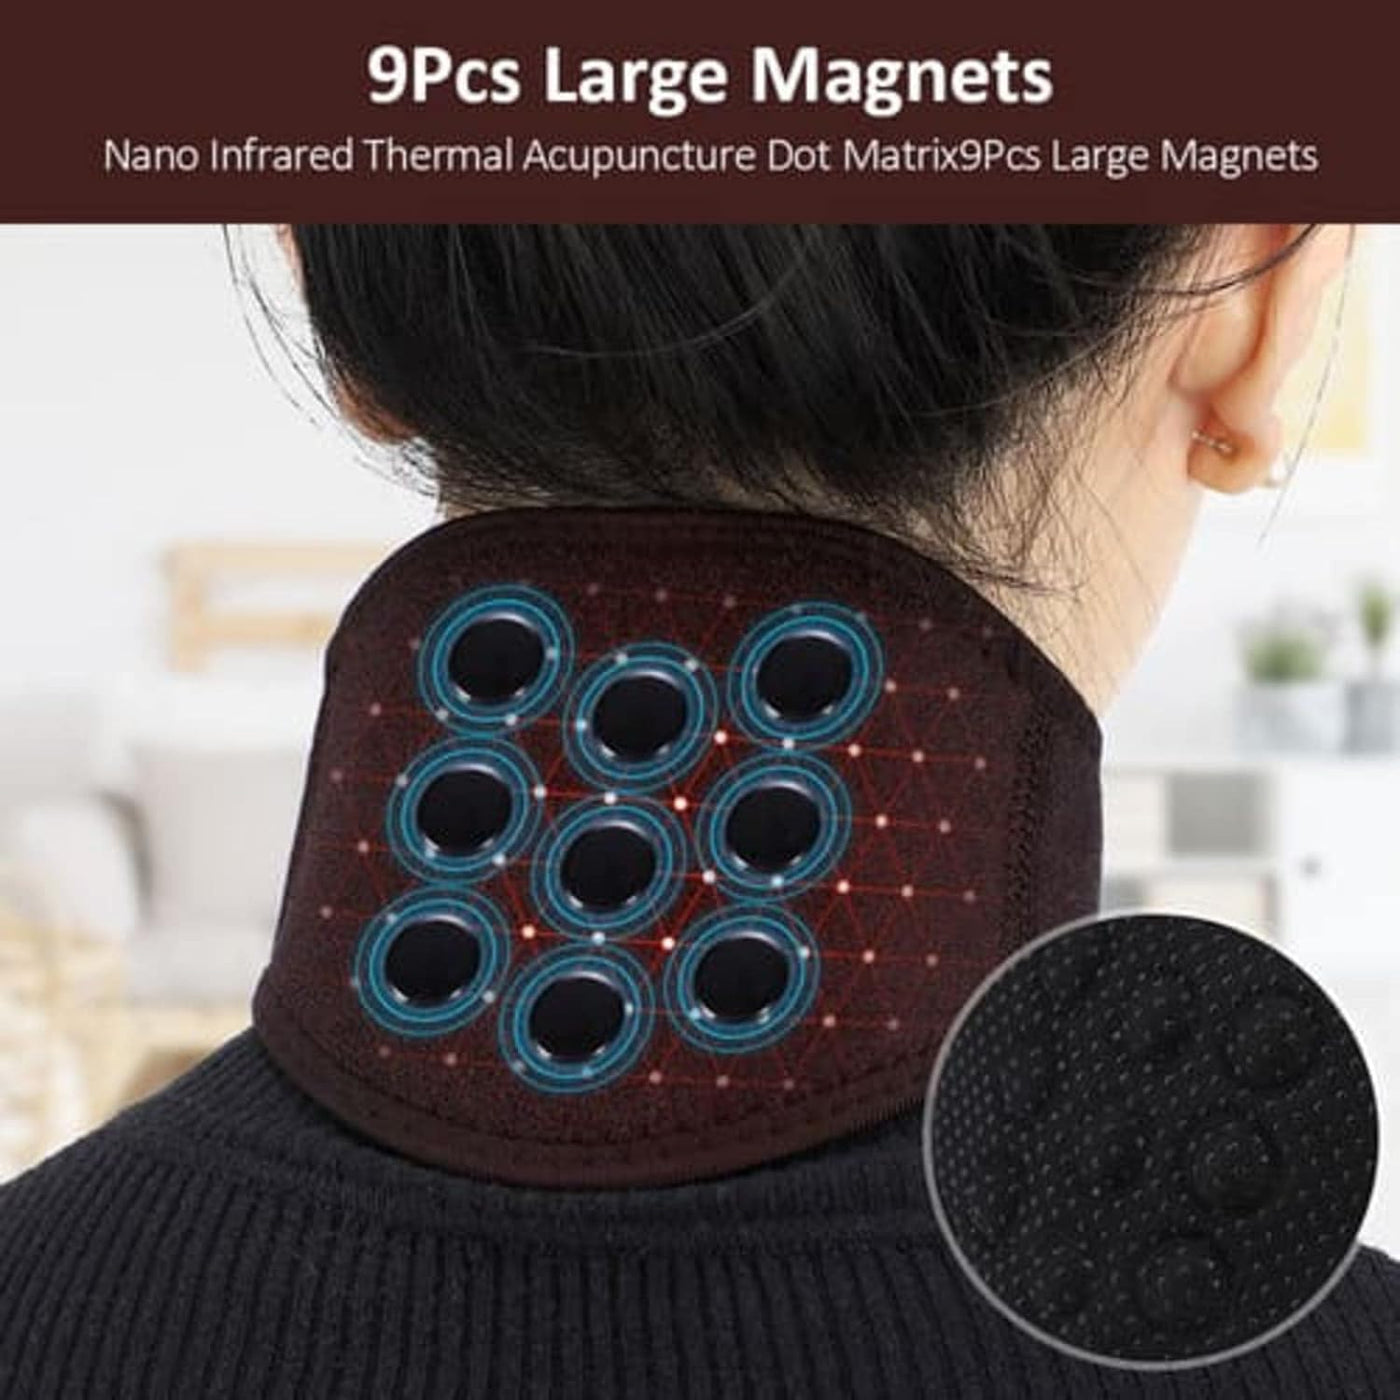 HEAL Neck Brace Support - Natural Magnet Heating Pad, Adjustable Neck Collar for Women and Men